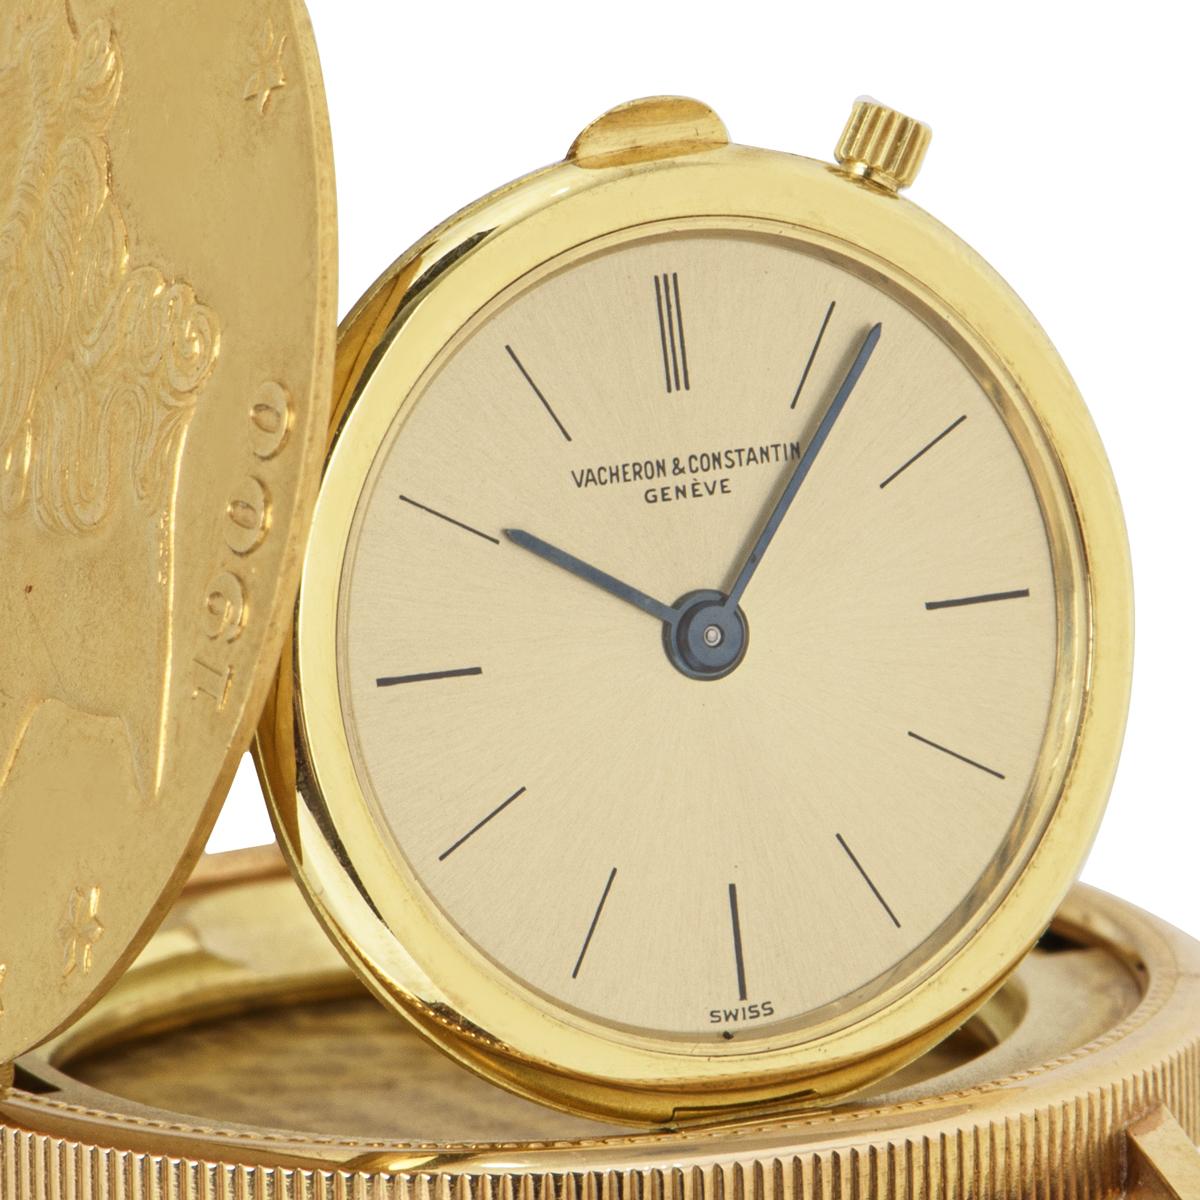 A stunning vintage coin wristwatch crafted in 18k yellow gold by Vacheron Constantin. Featuring a unique design of Lady Liberty and '1900' engraved on the front case as well as 'Twenty Dollars' engraved on the case back. The watch further features a